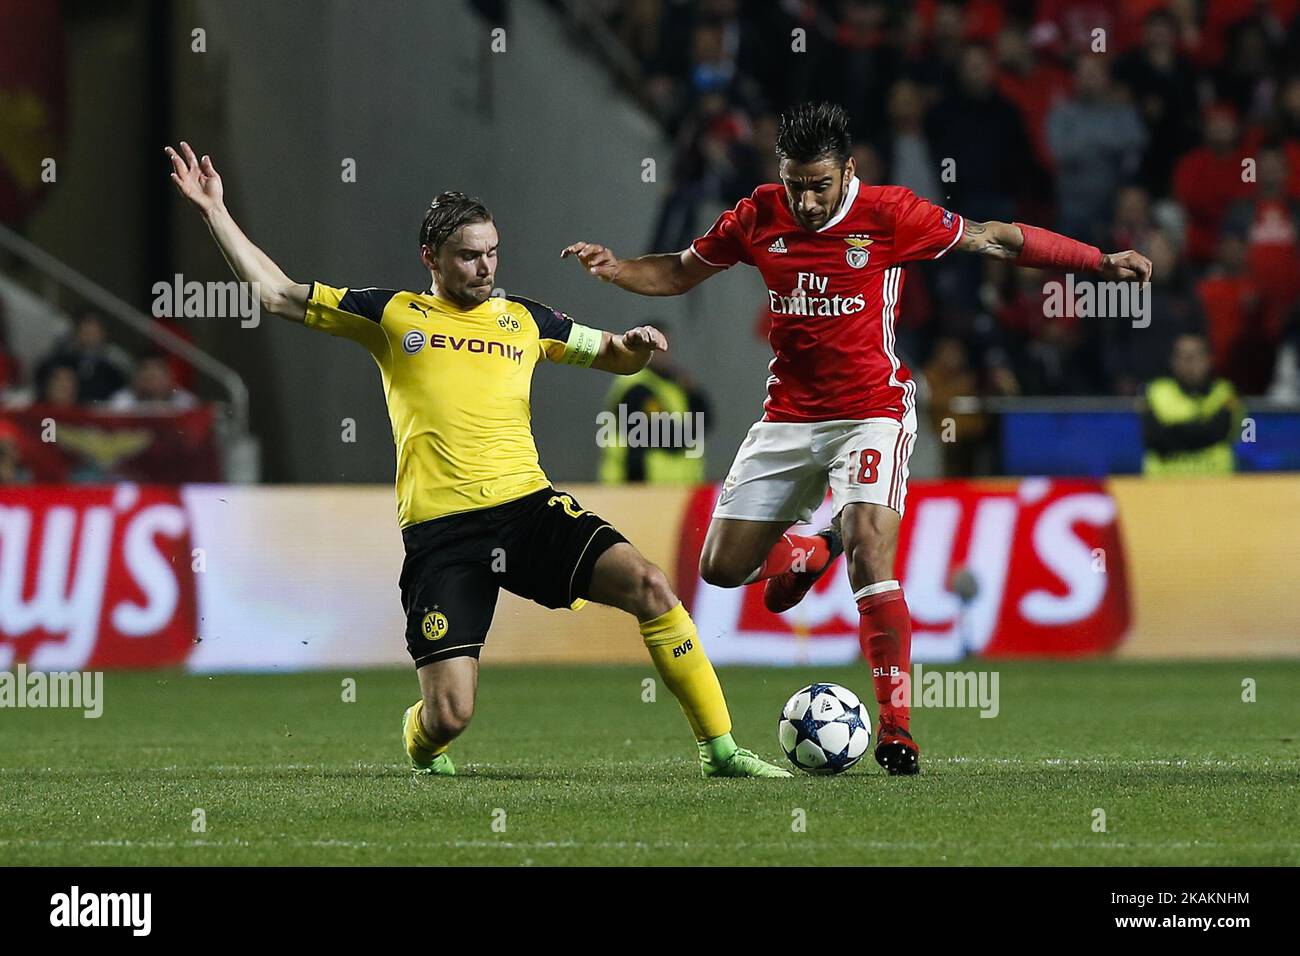 Dortmund's defender Marcel Schmelzer (L) vies for the ball with Benfica's forward Eduardo Salvio (R) during Champions League 2016/17 match between SL Benfica vs BVB Borussia Dortmund, in Lisbon, on February 14, 2017. (Photo by Carlos Palma/NurPhoto) *** Please Use Credit from Credit Field *** Stock Photo